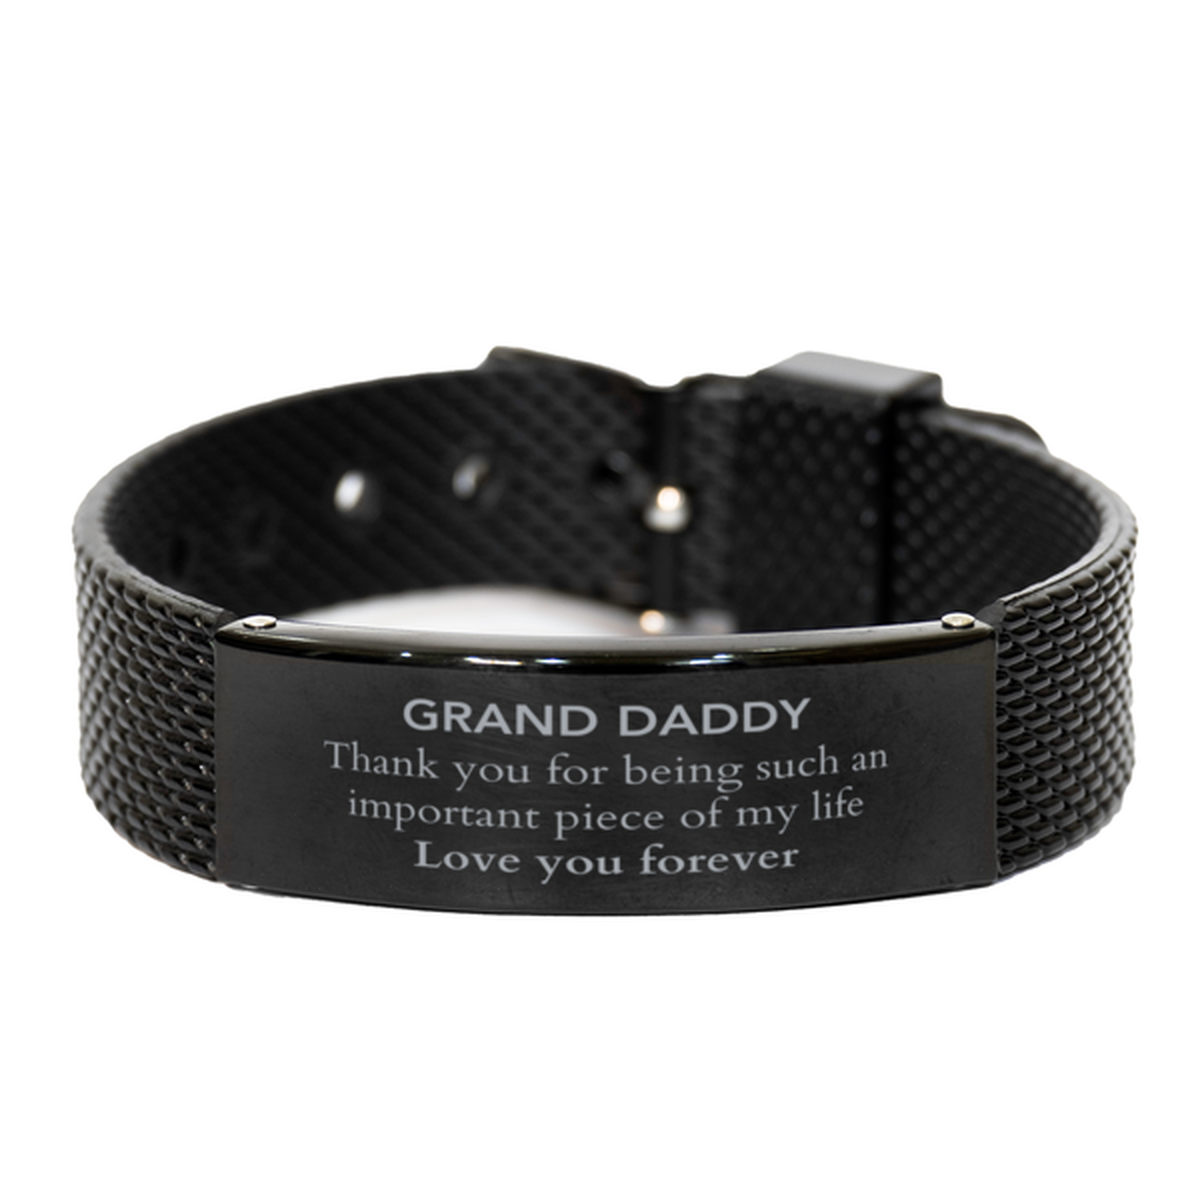 Appropriate Grand Daddy Black Shark Mesh Bracelet Epic Birthday Gifts for Grand Daddy Thank you for being such an important piece of my life Grand Daddy Christmas Mothers Fathers Day